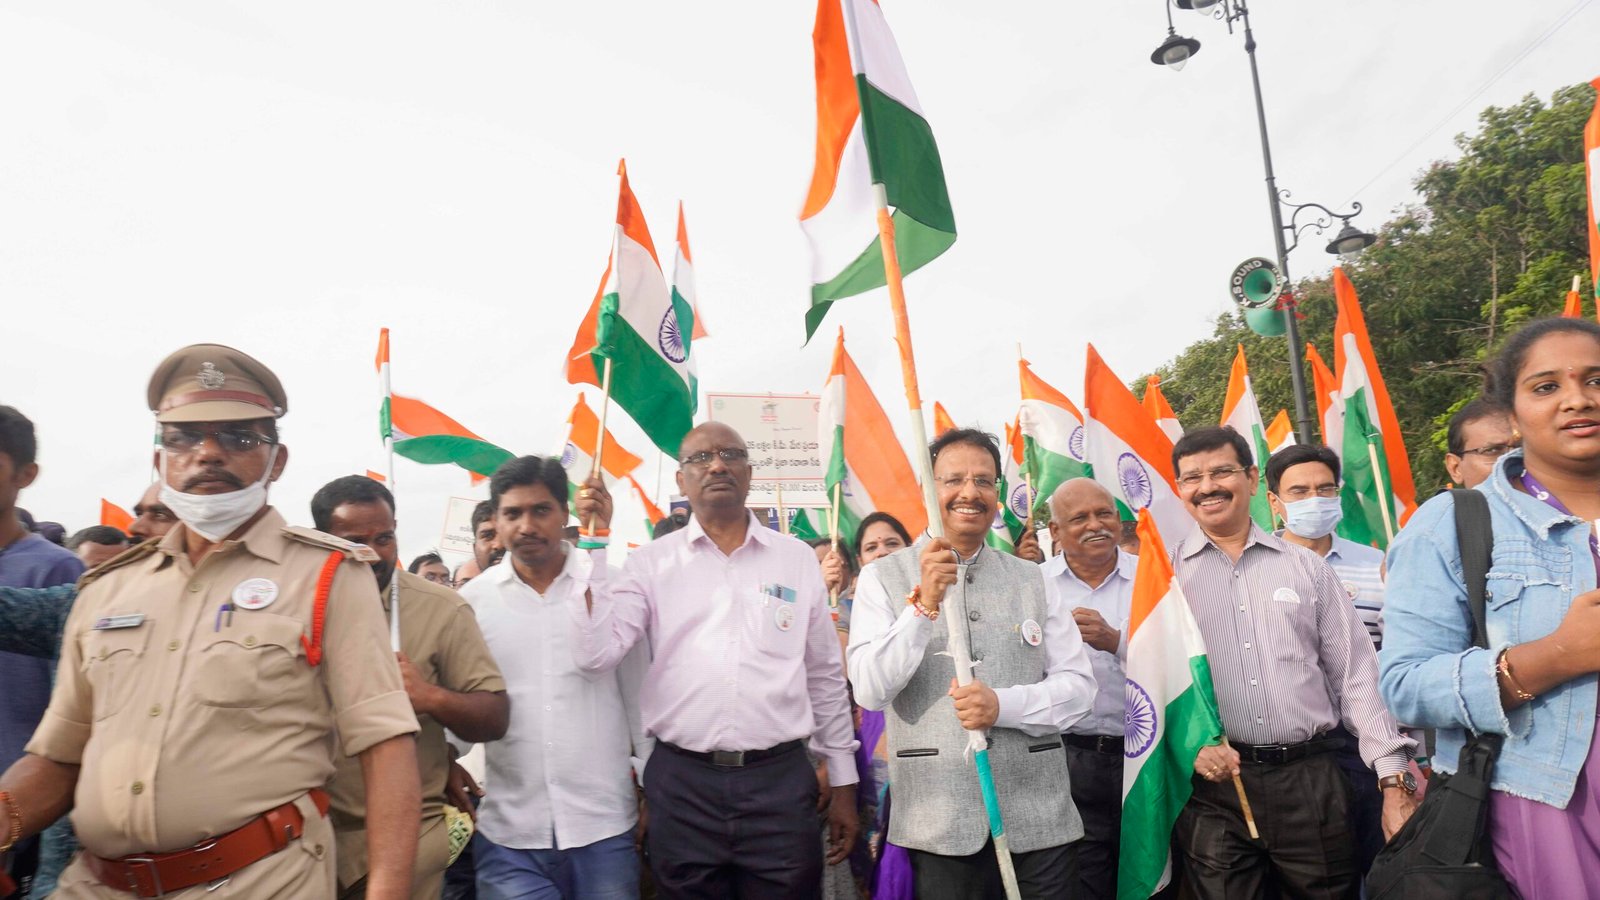 VC Sajjanar, CMD of TSRTC seen marching holding a national flag in his hand along with 1500 RTC staff-7